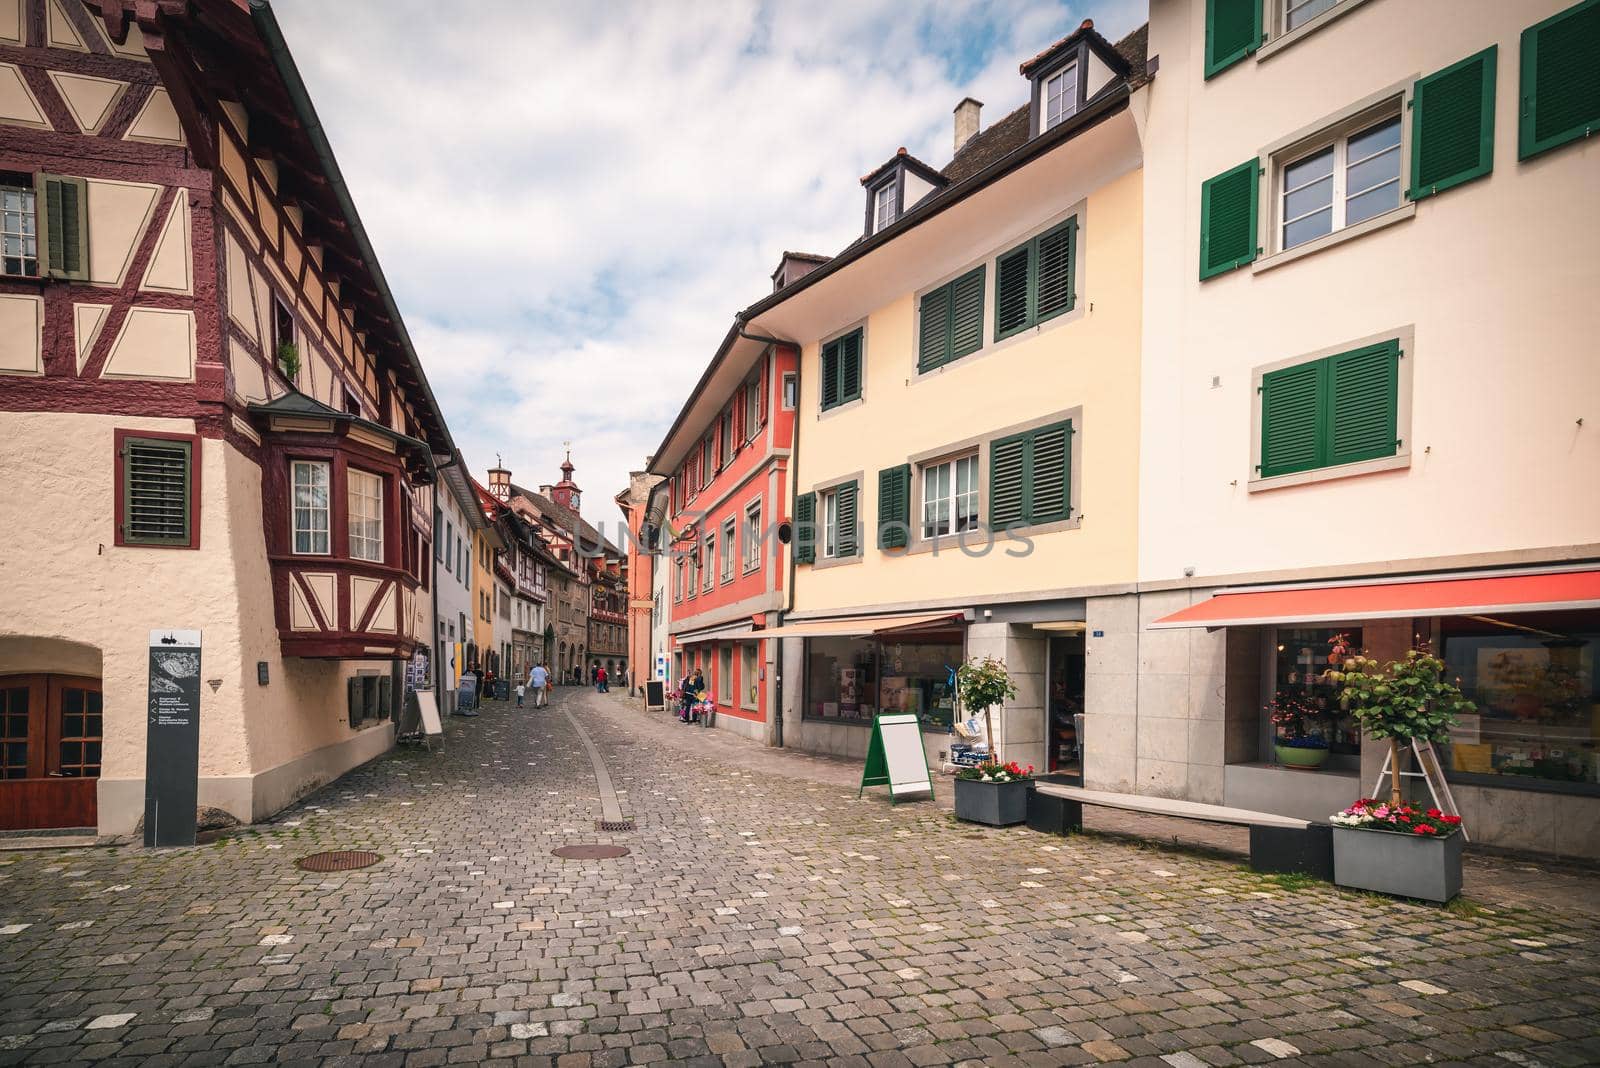 Cityscape Old Town and Historic Buildings of Stein Am Rhein City, Switzerland, Beautiful Ancient Church and Architecture of Swiss Culture. Travel Historical and Famous Place of Switzerland by MahaHeang245789